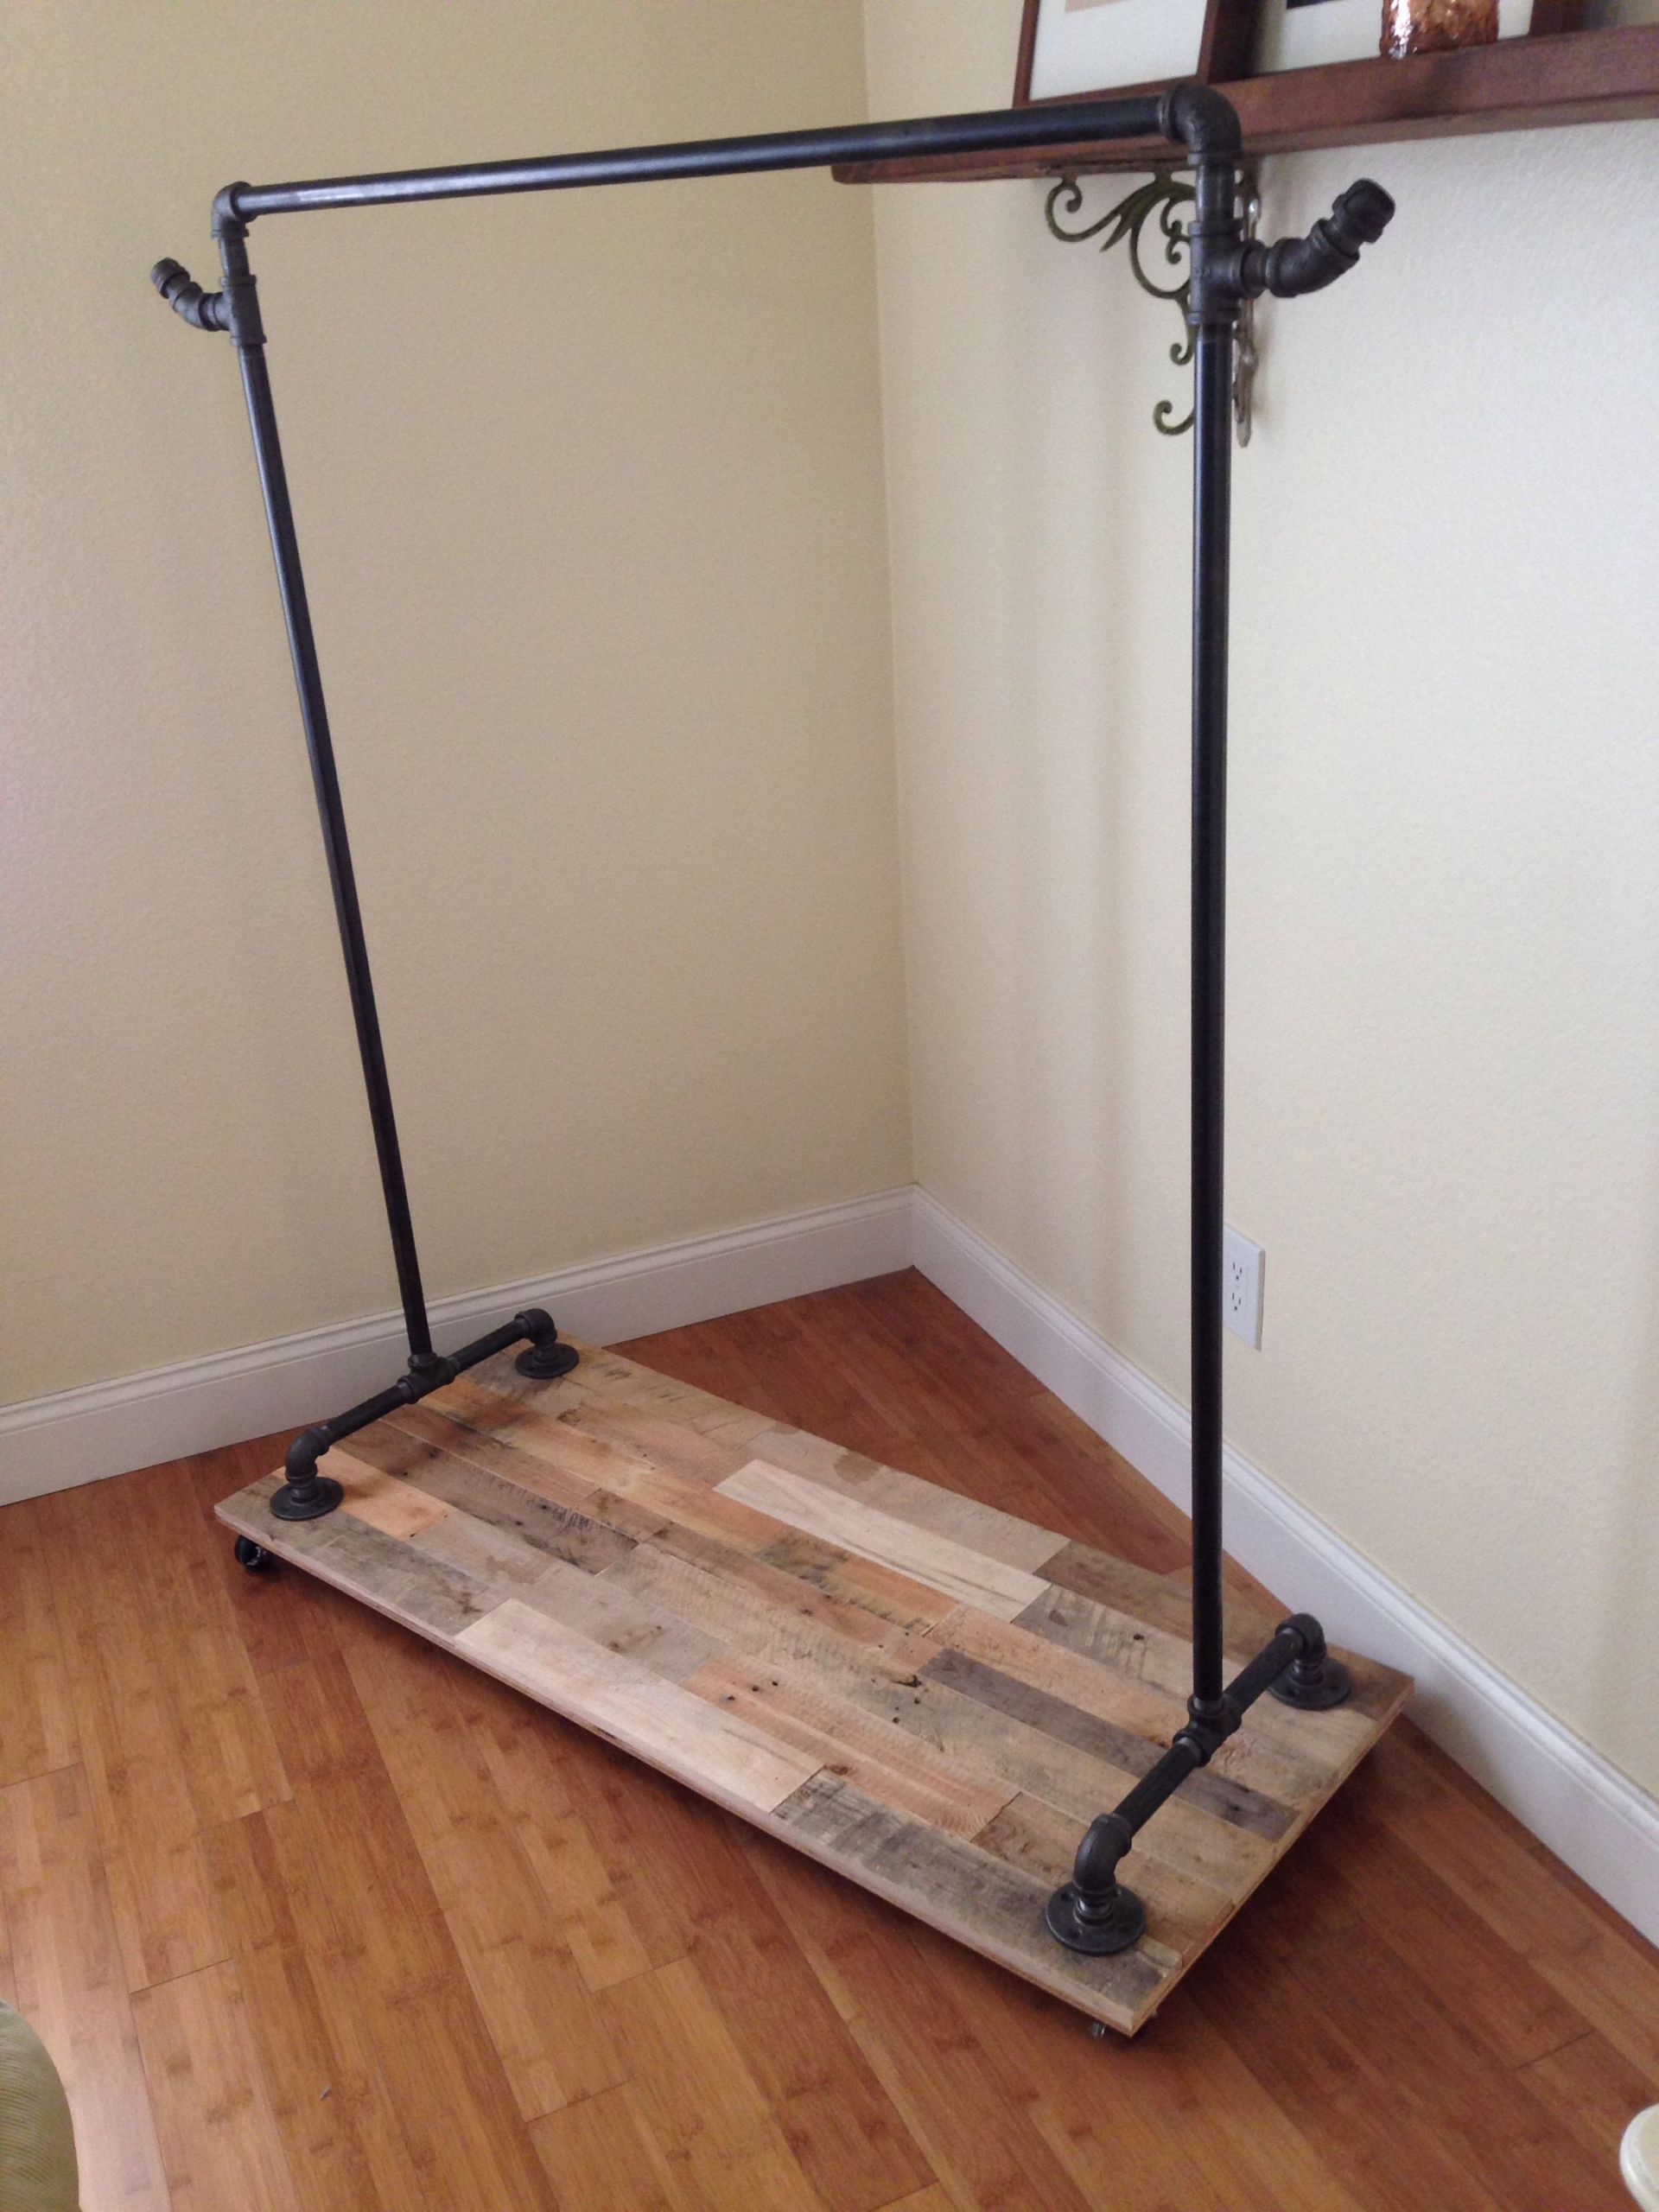 DIY Pipe Clothes Rack
 Pin on BUILTbyTOUCH